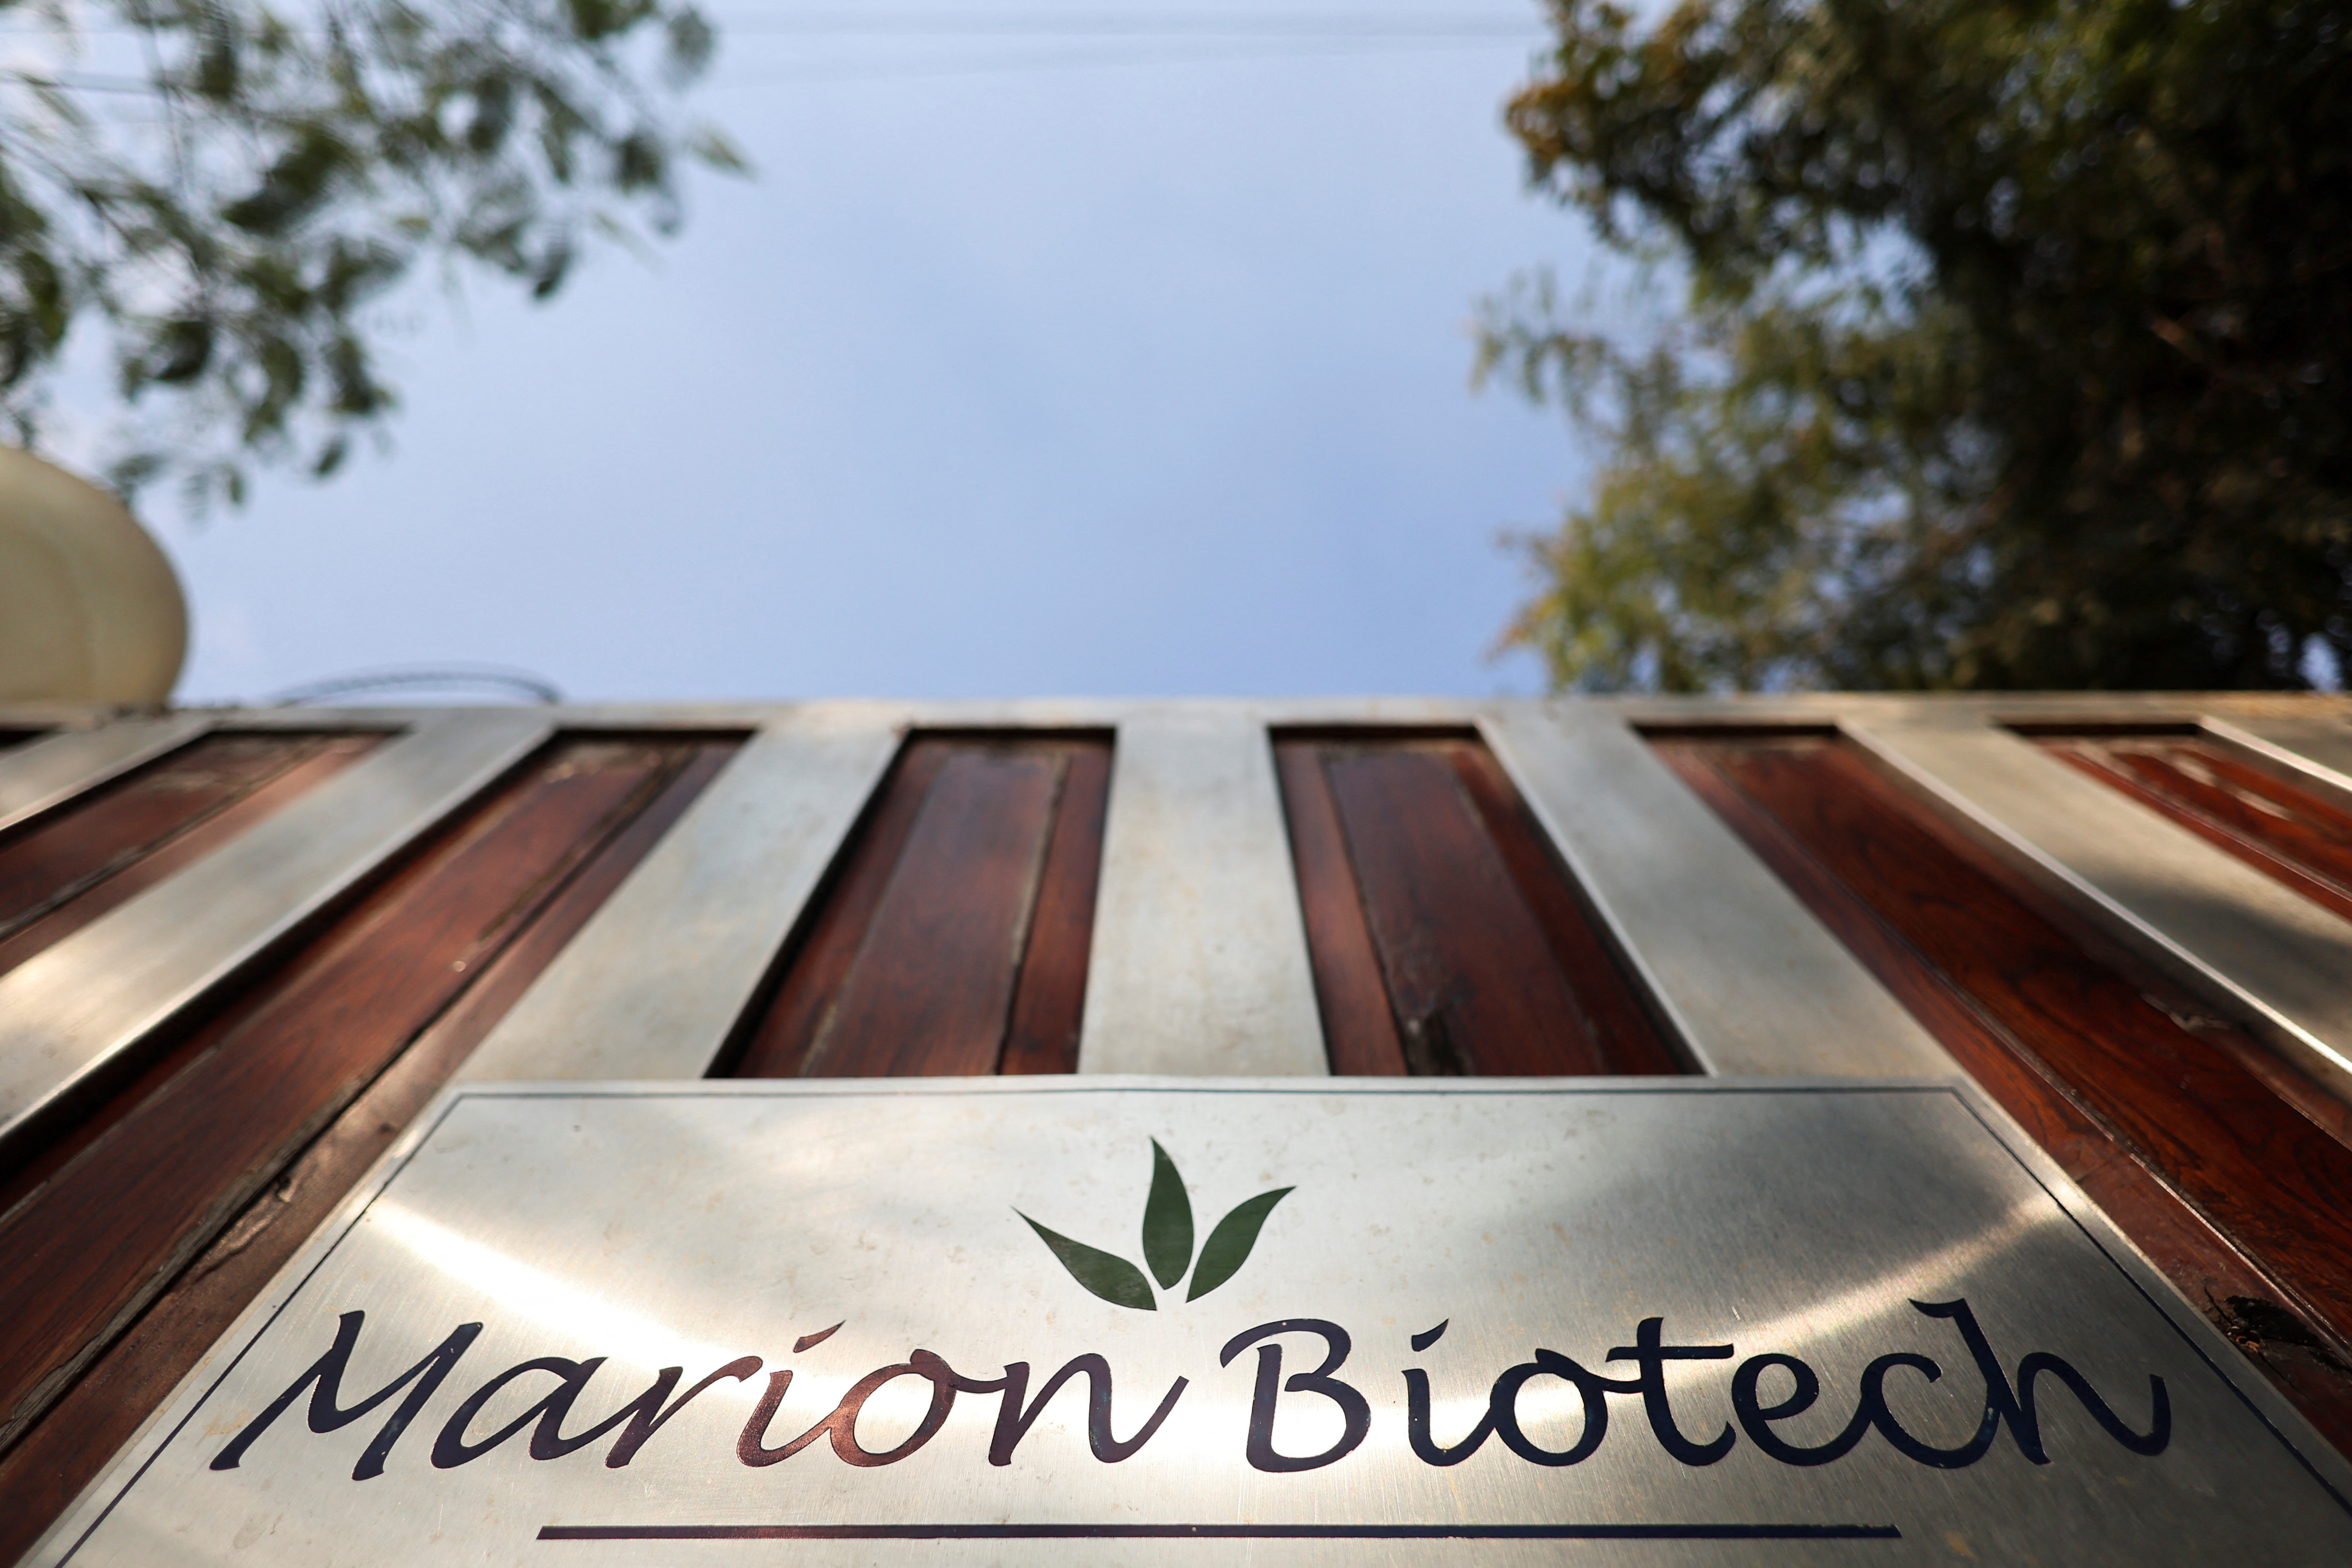 The logo of Marion Biotech, a healthcare and pharmaceutical company, can be seen on the gate outside its office in Noida.